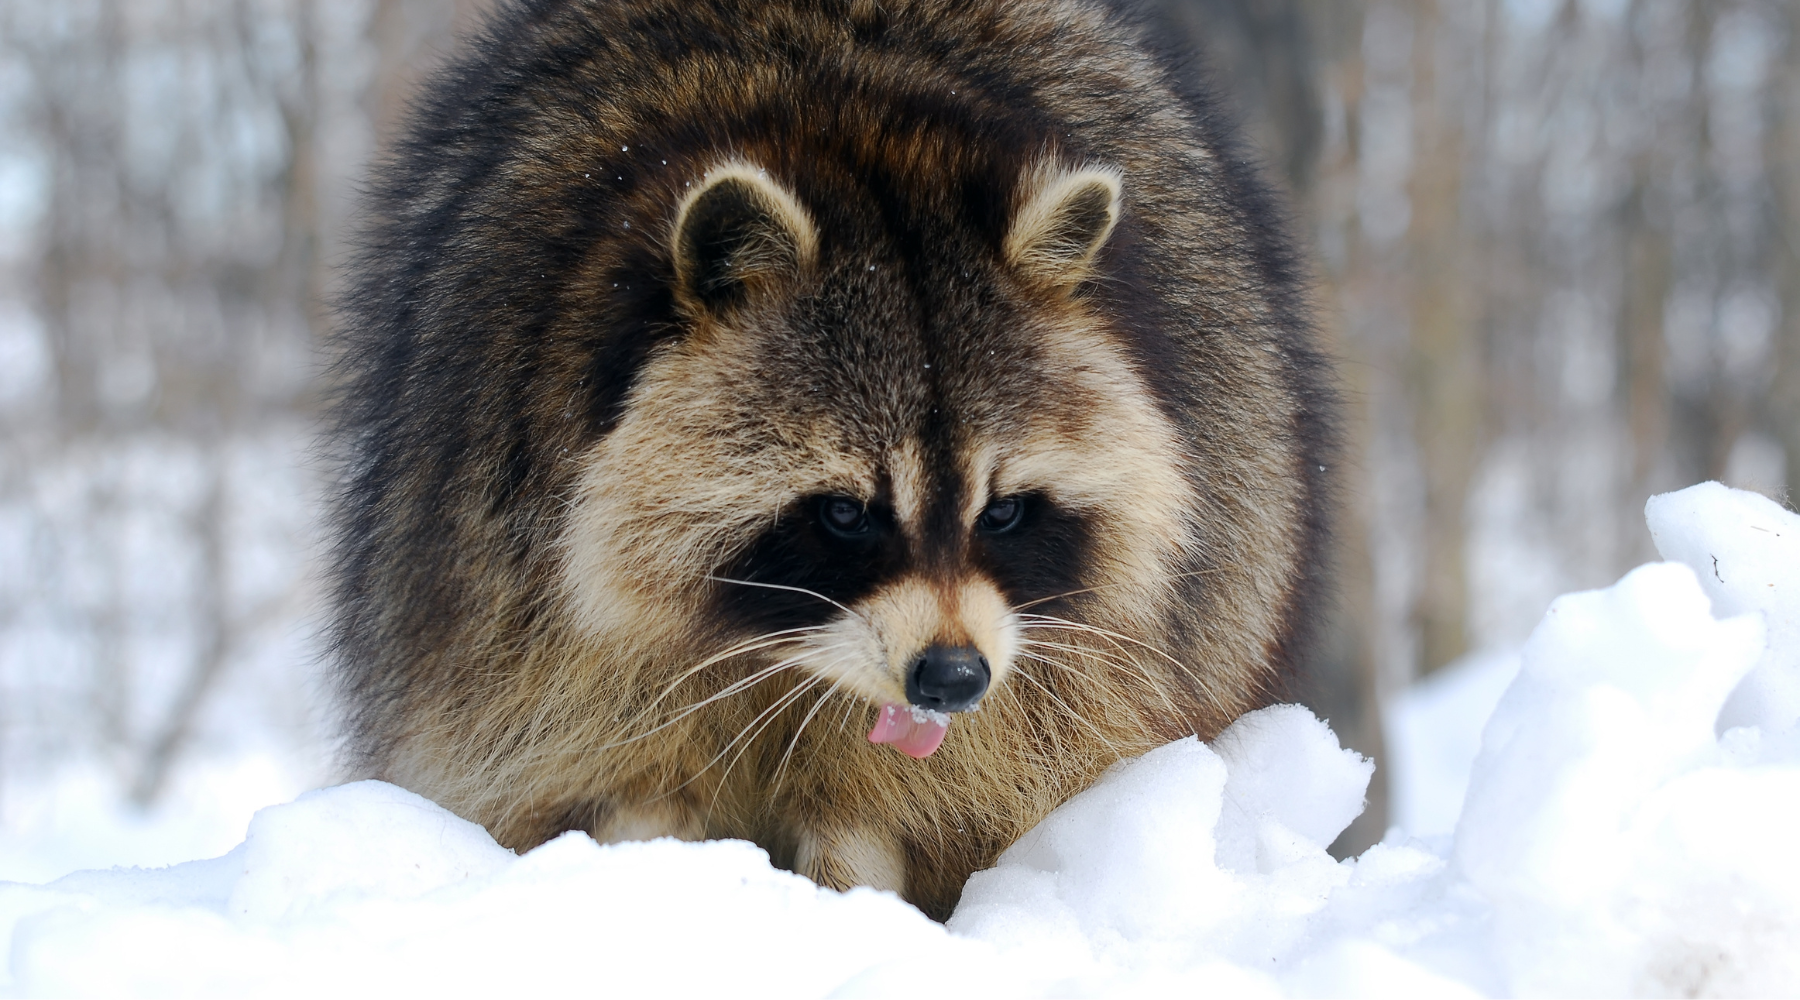 Raccoon in the snow